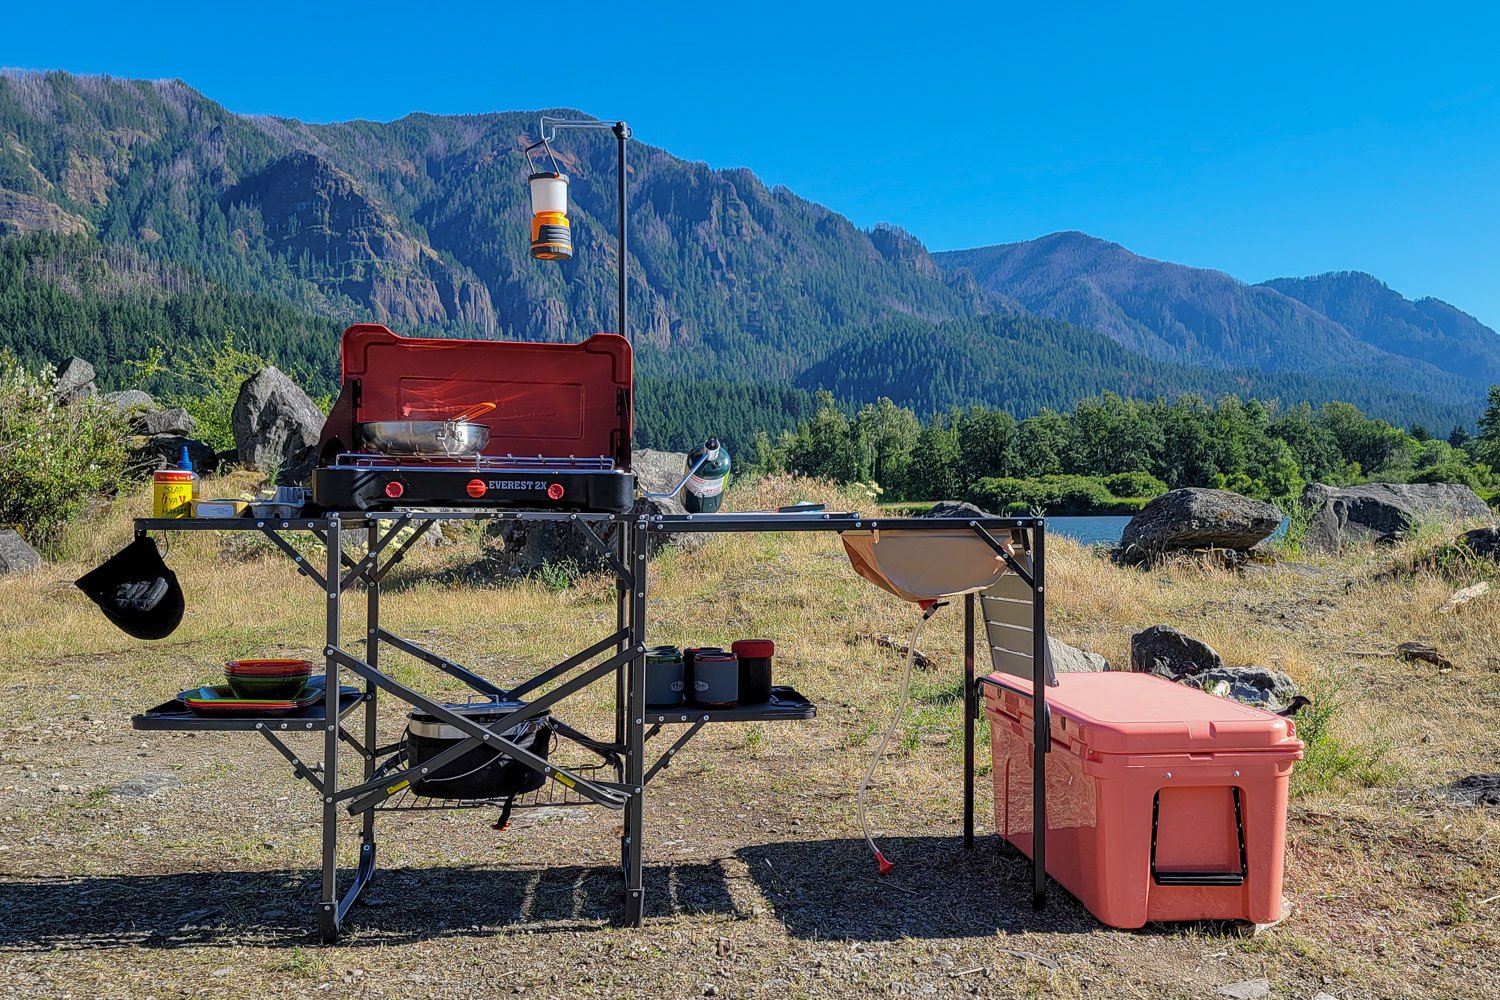 The 11 Best Camping Tables of 2024